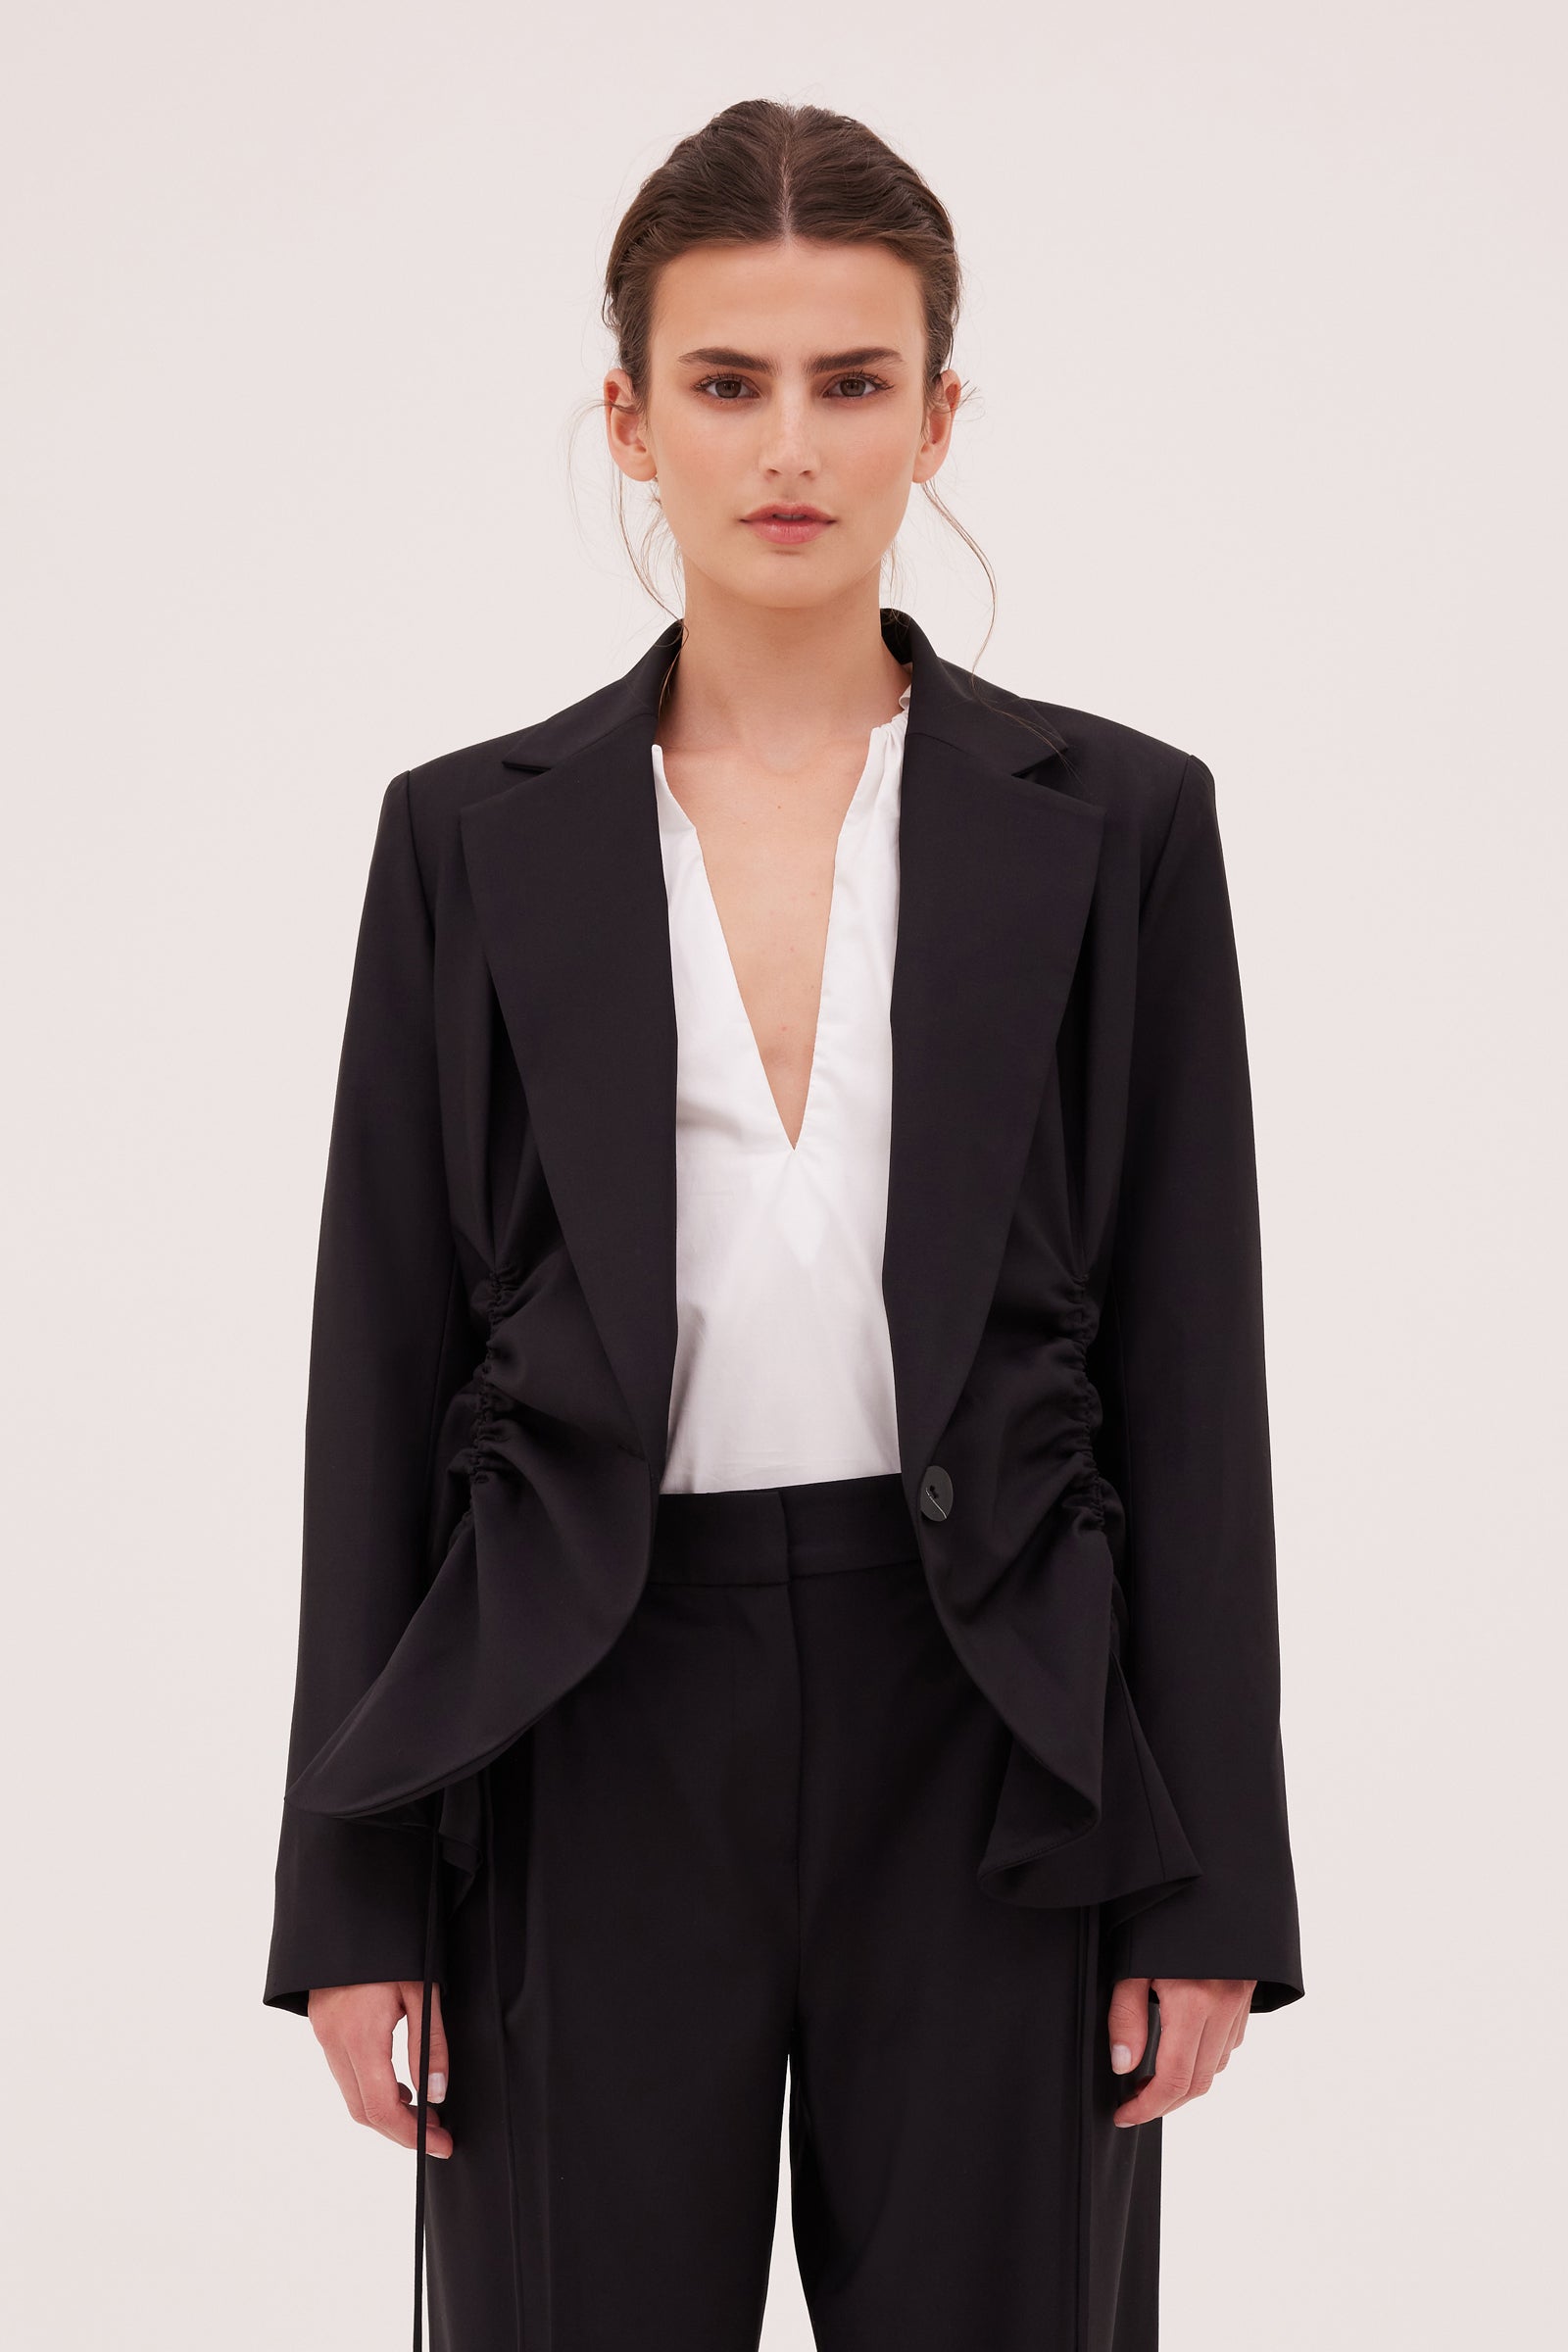 BLACK WOOL SUITING COMPOSITION JACKET